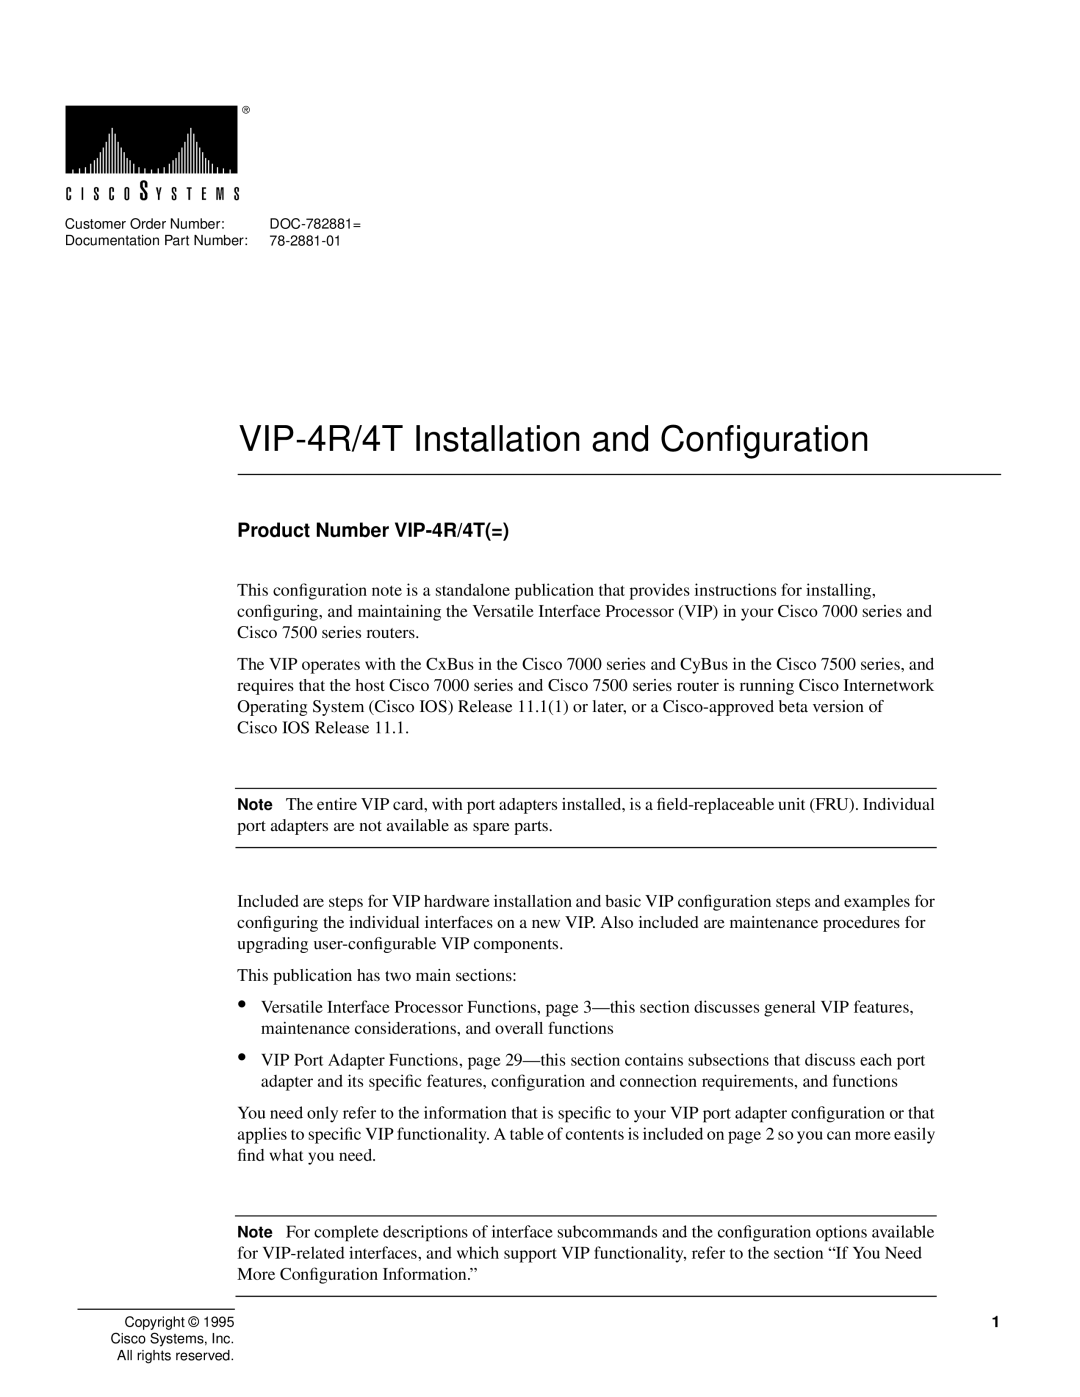 Cisco Systems manual VIP-4R/4T Installation and Conﬁguration, Product Number VIP-4R/4T= 